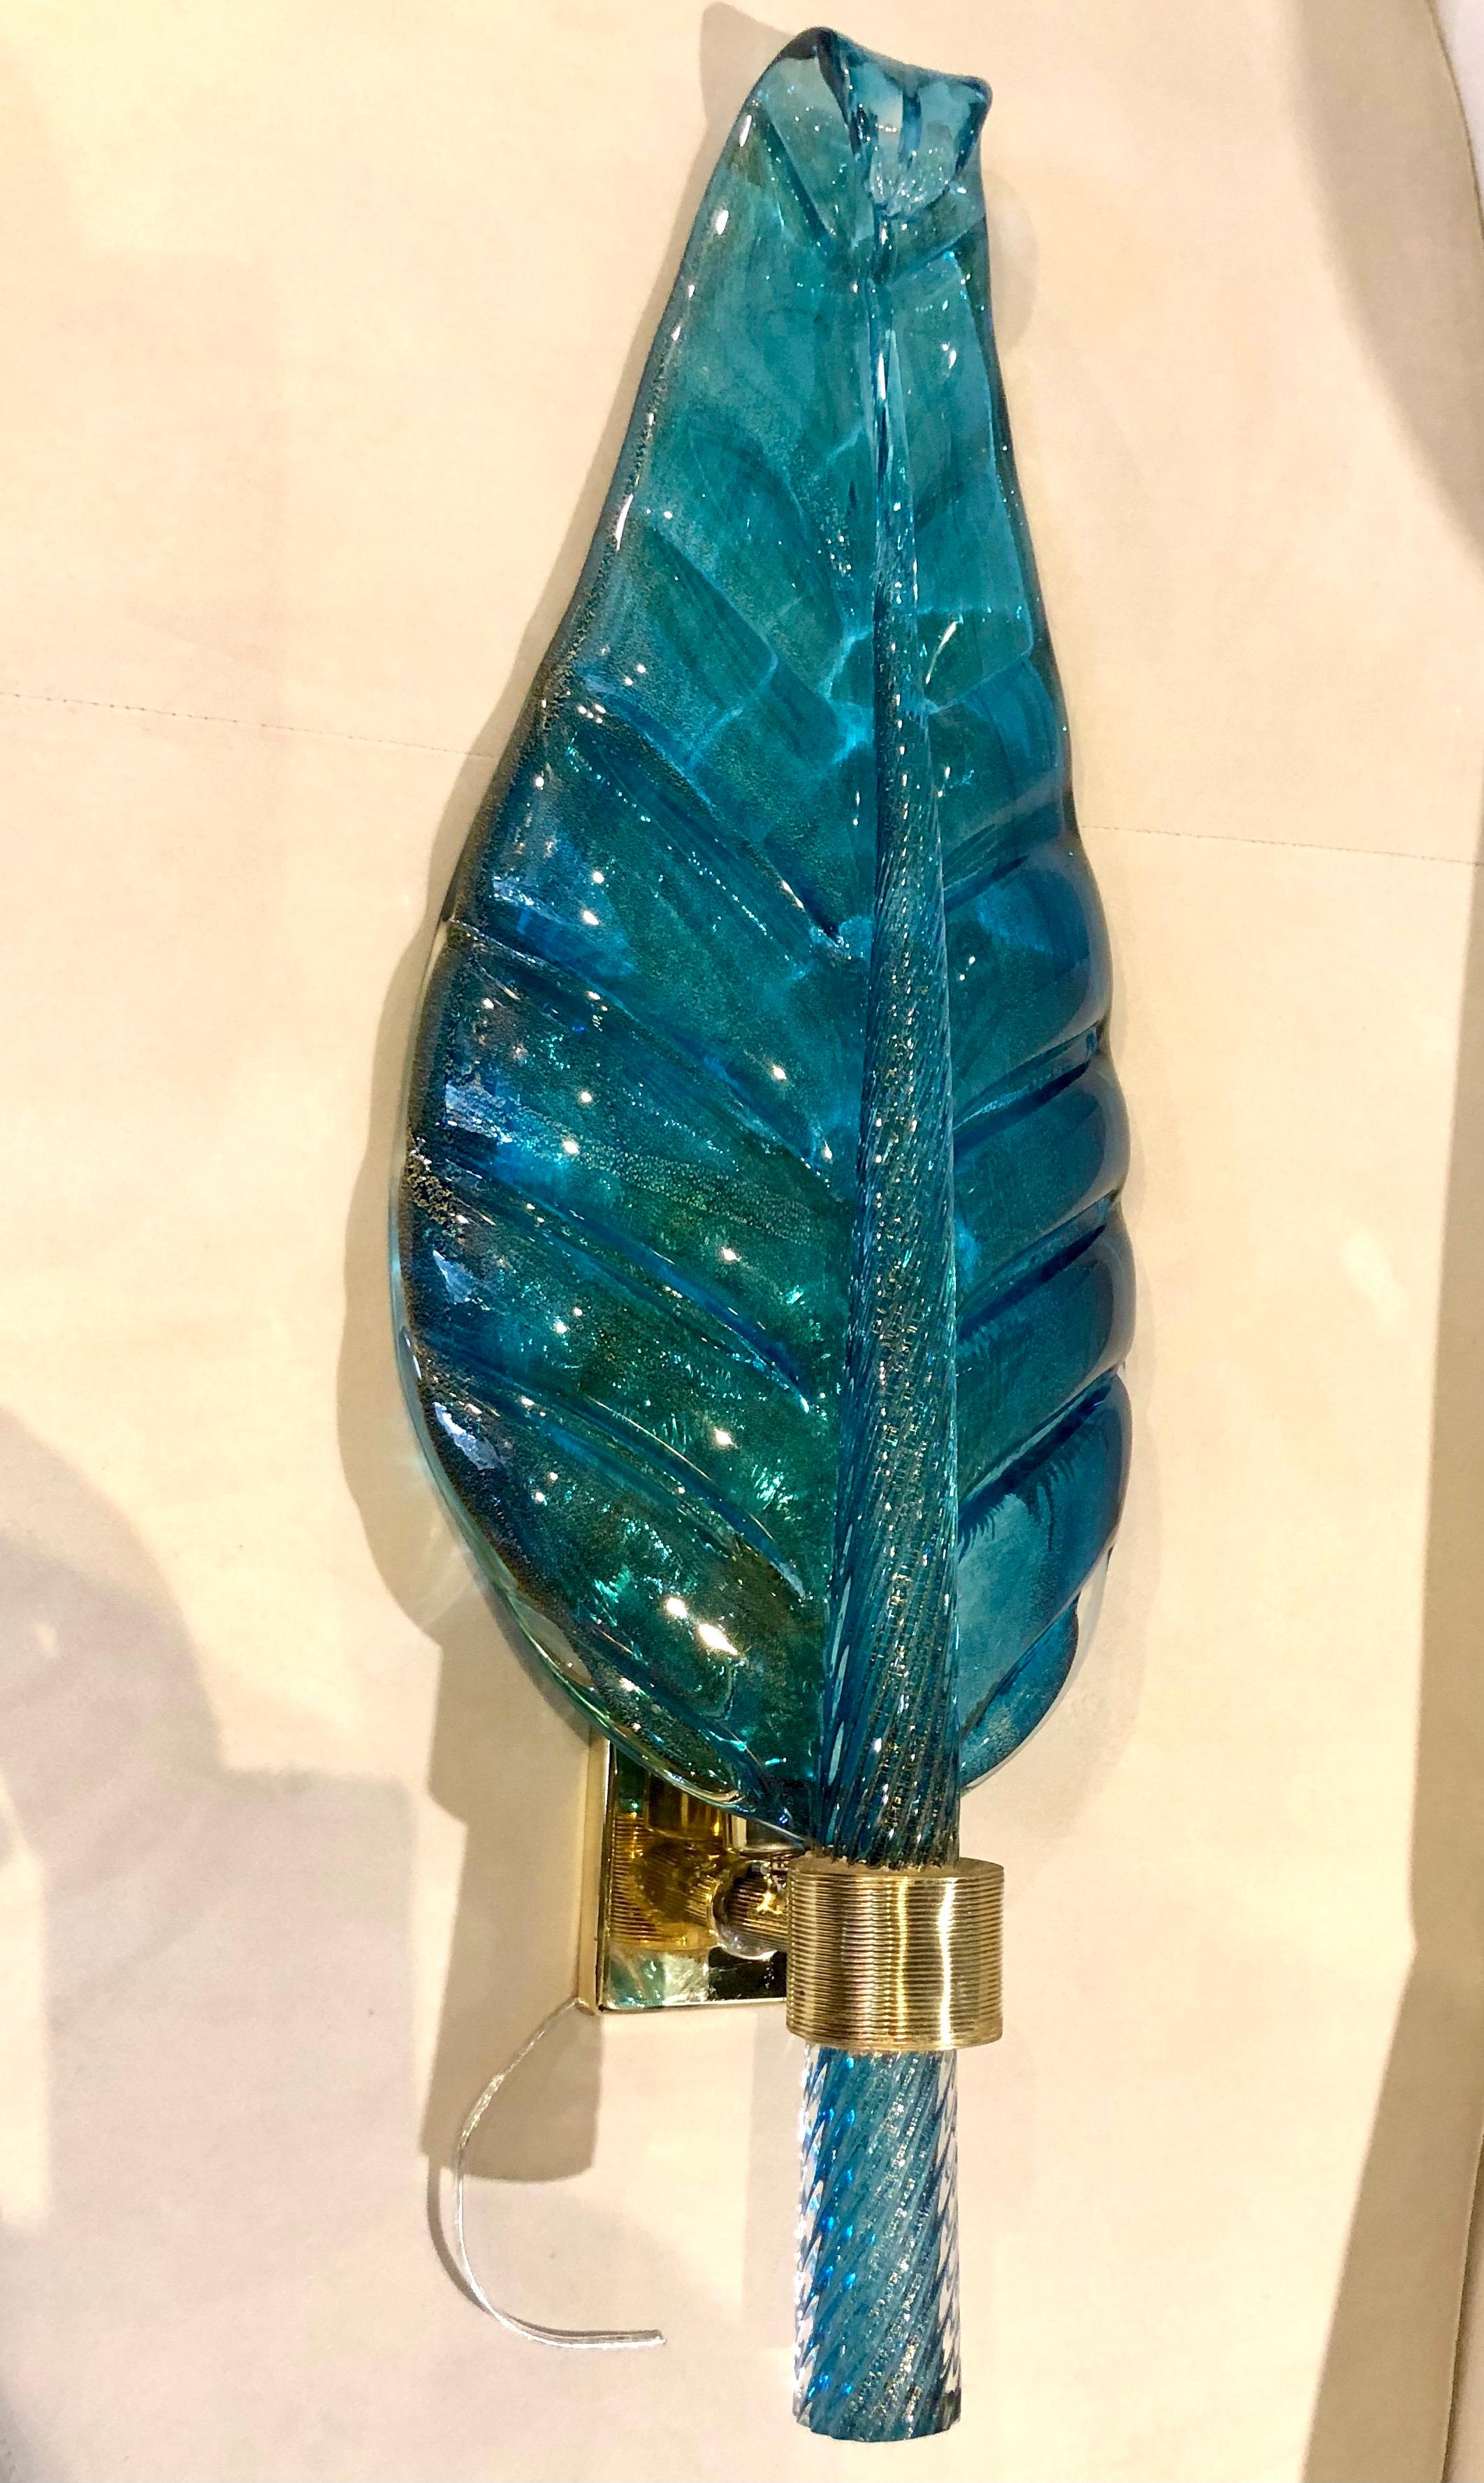 Rare blue murano glass leaf-form wall lights by Barovier & Toso. Italian, circa 1960. Each light is in the form of a leaf with a spiral twisted stem and set on gilt backplates. The reverse of the glass is made with a 'Rugiadoso' technique,